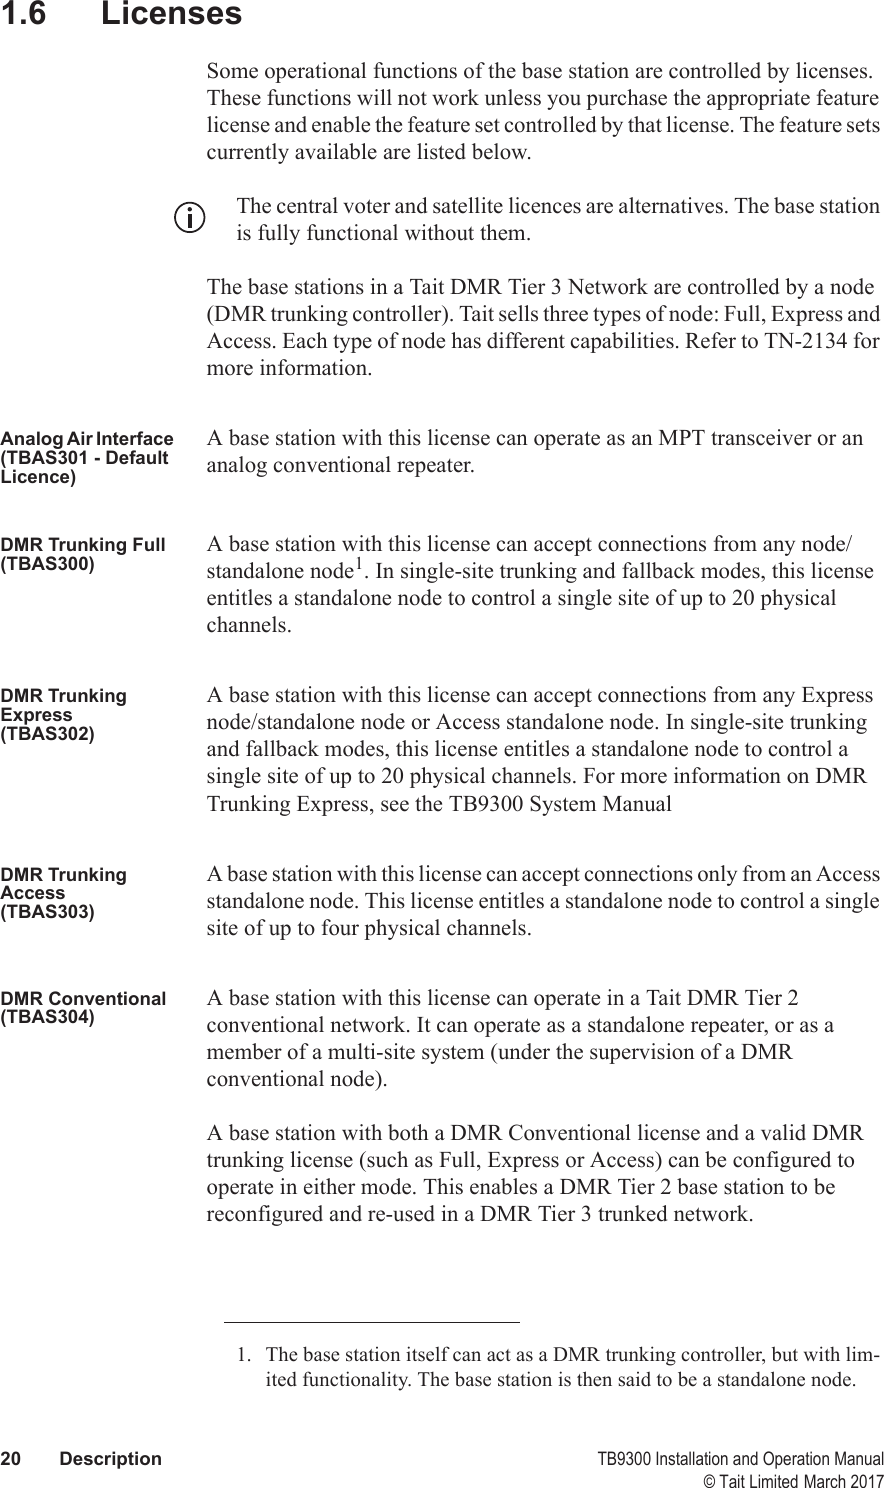  20 Description TB9300 Installation and Operation Manual© Tait Limited March 20171.6 LicensesSome operational functions of the base station are controlled by licenses. These functions will not work unless you purchase the appropriate feature license and enable the feature set controlled by that license. The feature sets currently available are listed below.The central voter and satellite licences are alternatives. The base station is fully functional without them.The base stations in a Tait DMR Tier 3 Network are controlled by a node (DMR trunking controller). Tait sells three types of node: Full, Express and Access. Each type of node has different capabilities. Refer to TN-2134 for more information.Analog Air Interface (TBAS301 - Default Licence)A base station with this license can operate as an MPT transceiver or an analog conventional repeater.DMR Trunking Full(TBAS300)A base station with this license can accept connections from any node/standalone node1. In single-site trunking and fallback modes, this license entitles a standalone node to control a single site of up to 20 physical channels.DMR Trunking Express(TBAS302)A base station with this license can accept connections from any Express node/standalone node or Access standalone node. In single-site trunking and fallback modes, this license entitles a standalone node to control a single site of up to 20 physical channels. For more information on DMR Trunking Express, see the TB9300 System ManualDMR Trunking Access(TBAS303)A base station with this license can accept connections only from an Access standalone node. This license entitles a standalone node to control a single site of up to four physical channels.DMR Conventional(TBAS304)A base station with this license can operate in a Tait DMR Tier 2 conventional network. It can operate as a standalone repeater, or as a member of a multi-site system (under the supervision of a DMR conventional node).A base station with both a DMR Conventional license and a valid DMR trunking license (such as Full, Express or Access) can be configured to operate in either mode. This enables a DMR Tier 2 base station to be reconfigured and re-used in a DMR Tier 3 trunked network.1. The base station itself can act as a DMR trunking controller, but with lim-ited functionality. The base station is then said to be a standalone node.